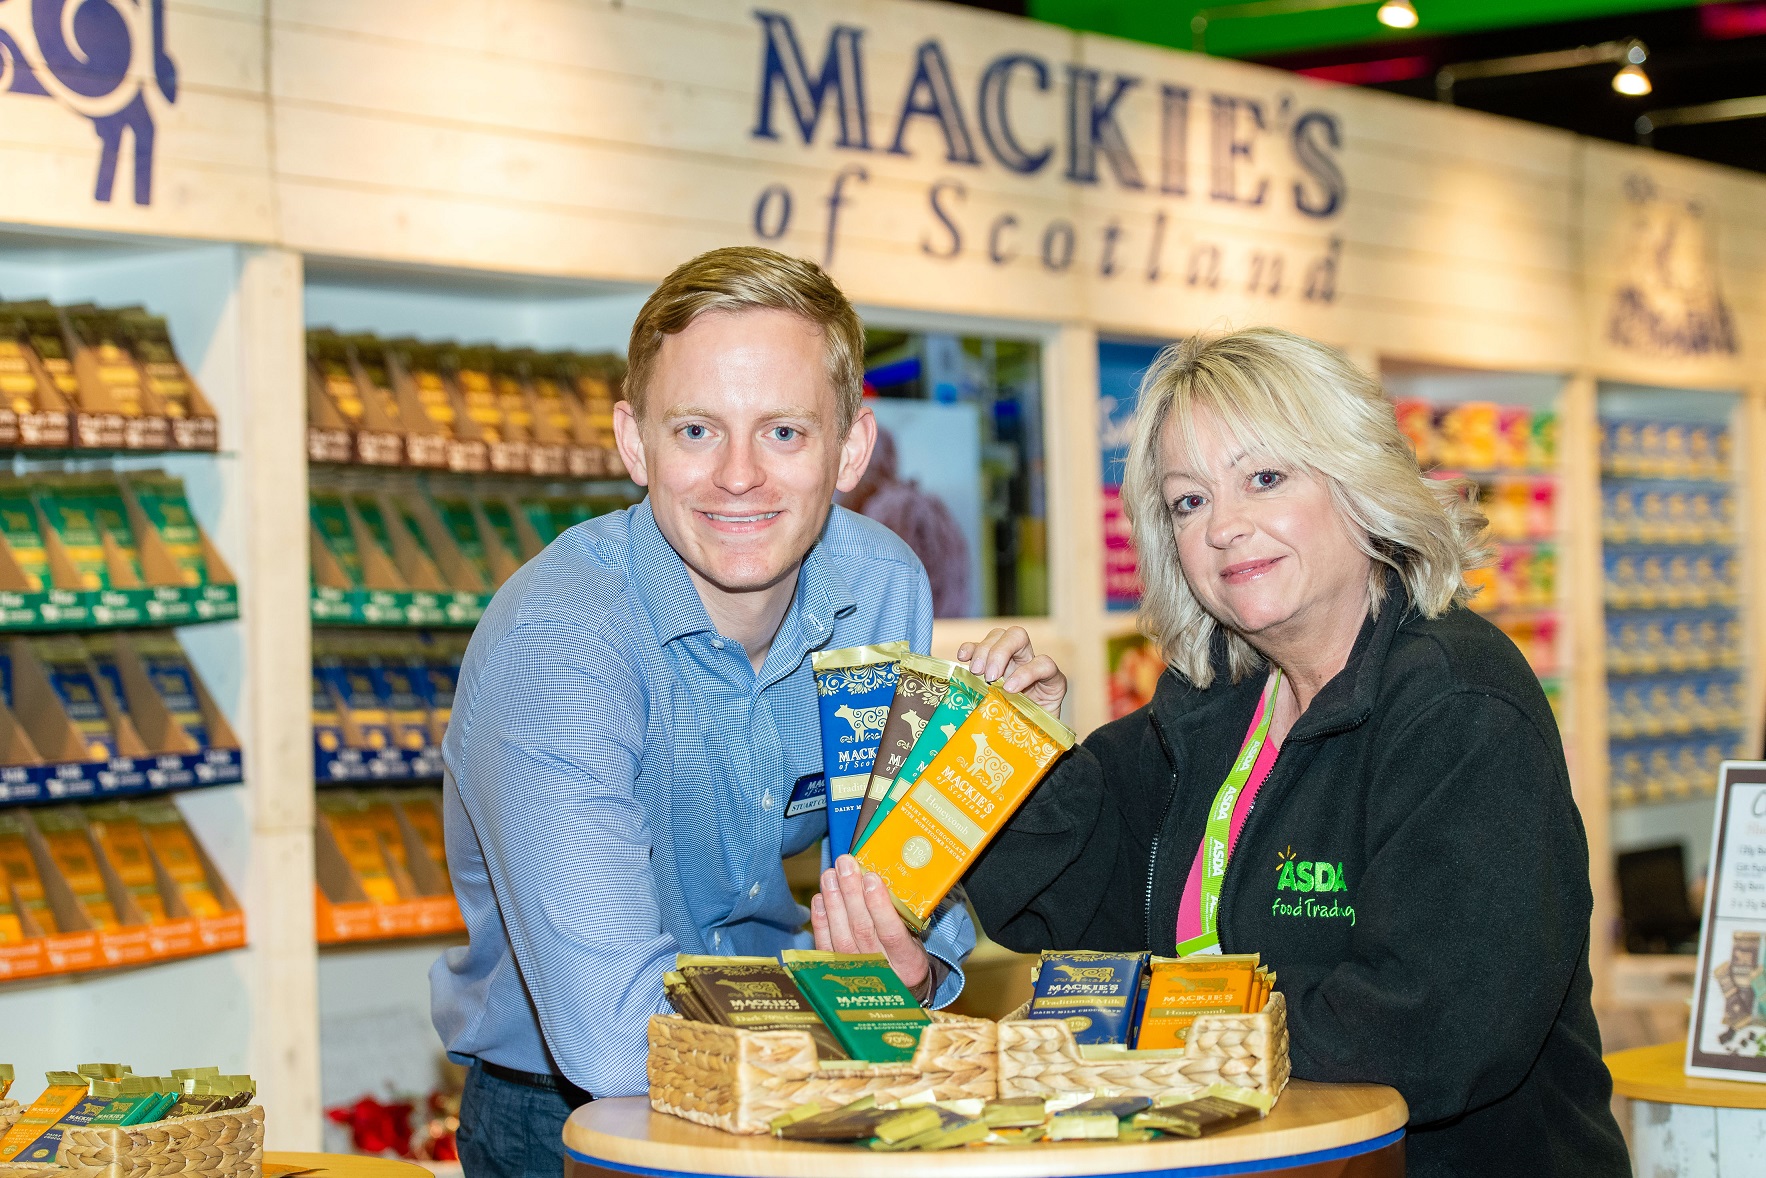 Stuart Common (Mackie’s Sales Director) and Yvonne McArthur Asda Buying Assistant